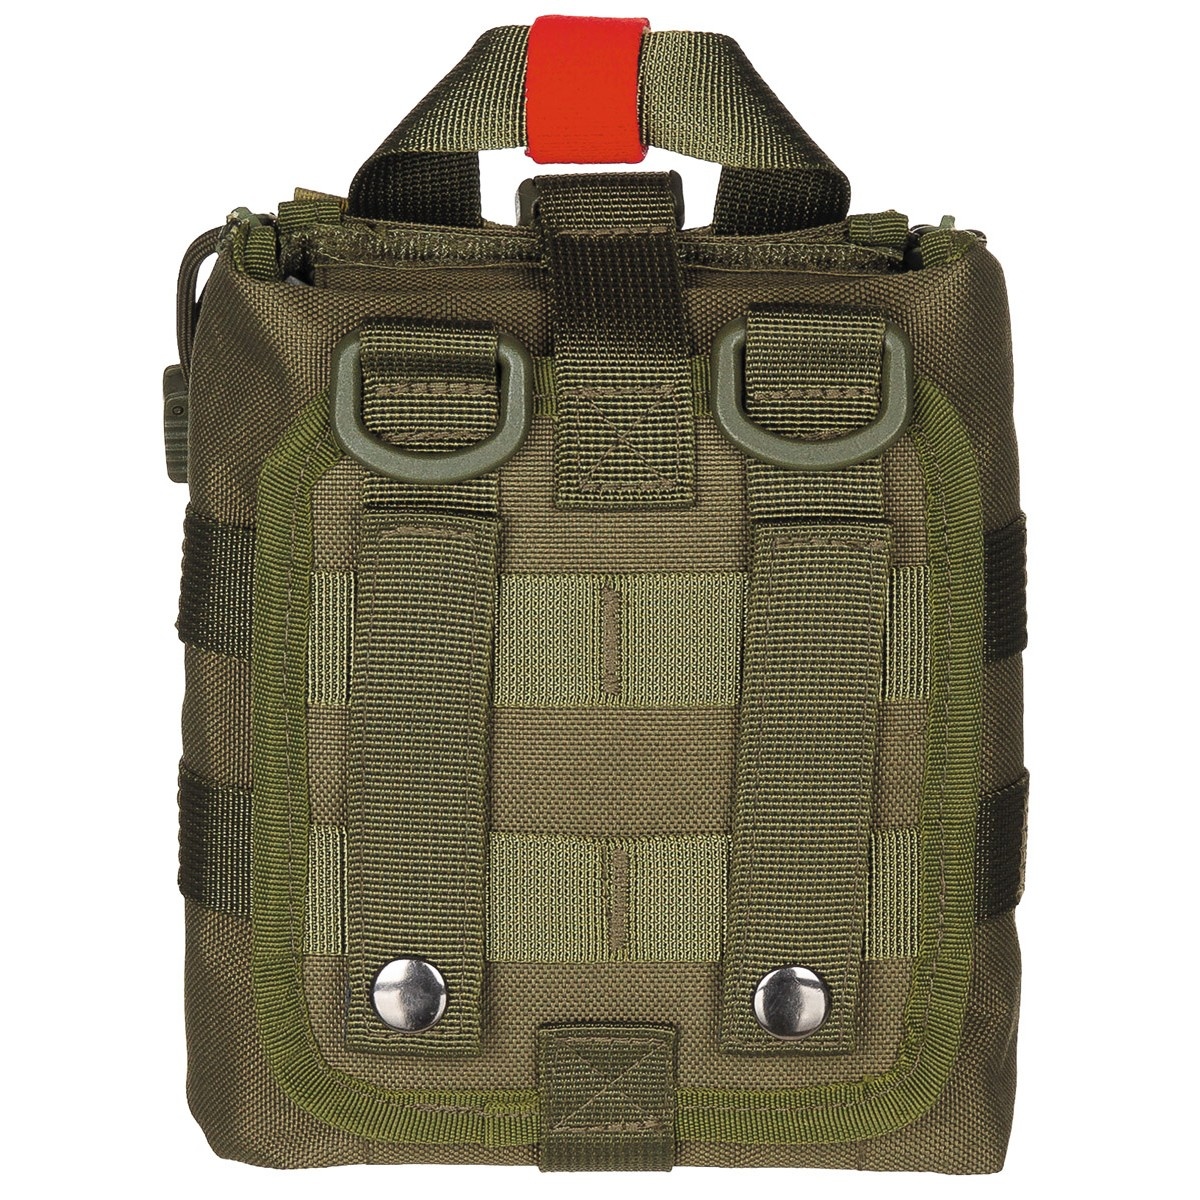 MFH First aid bag small MOLLE - OD